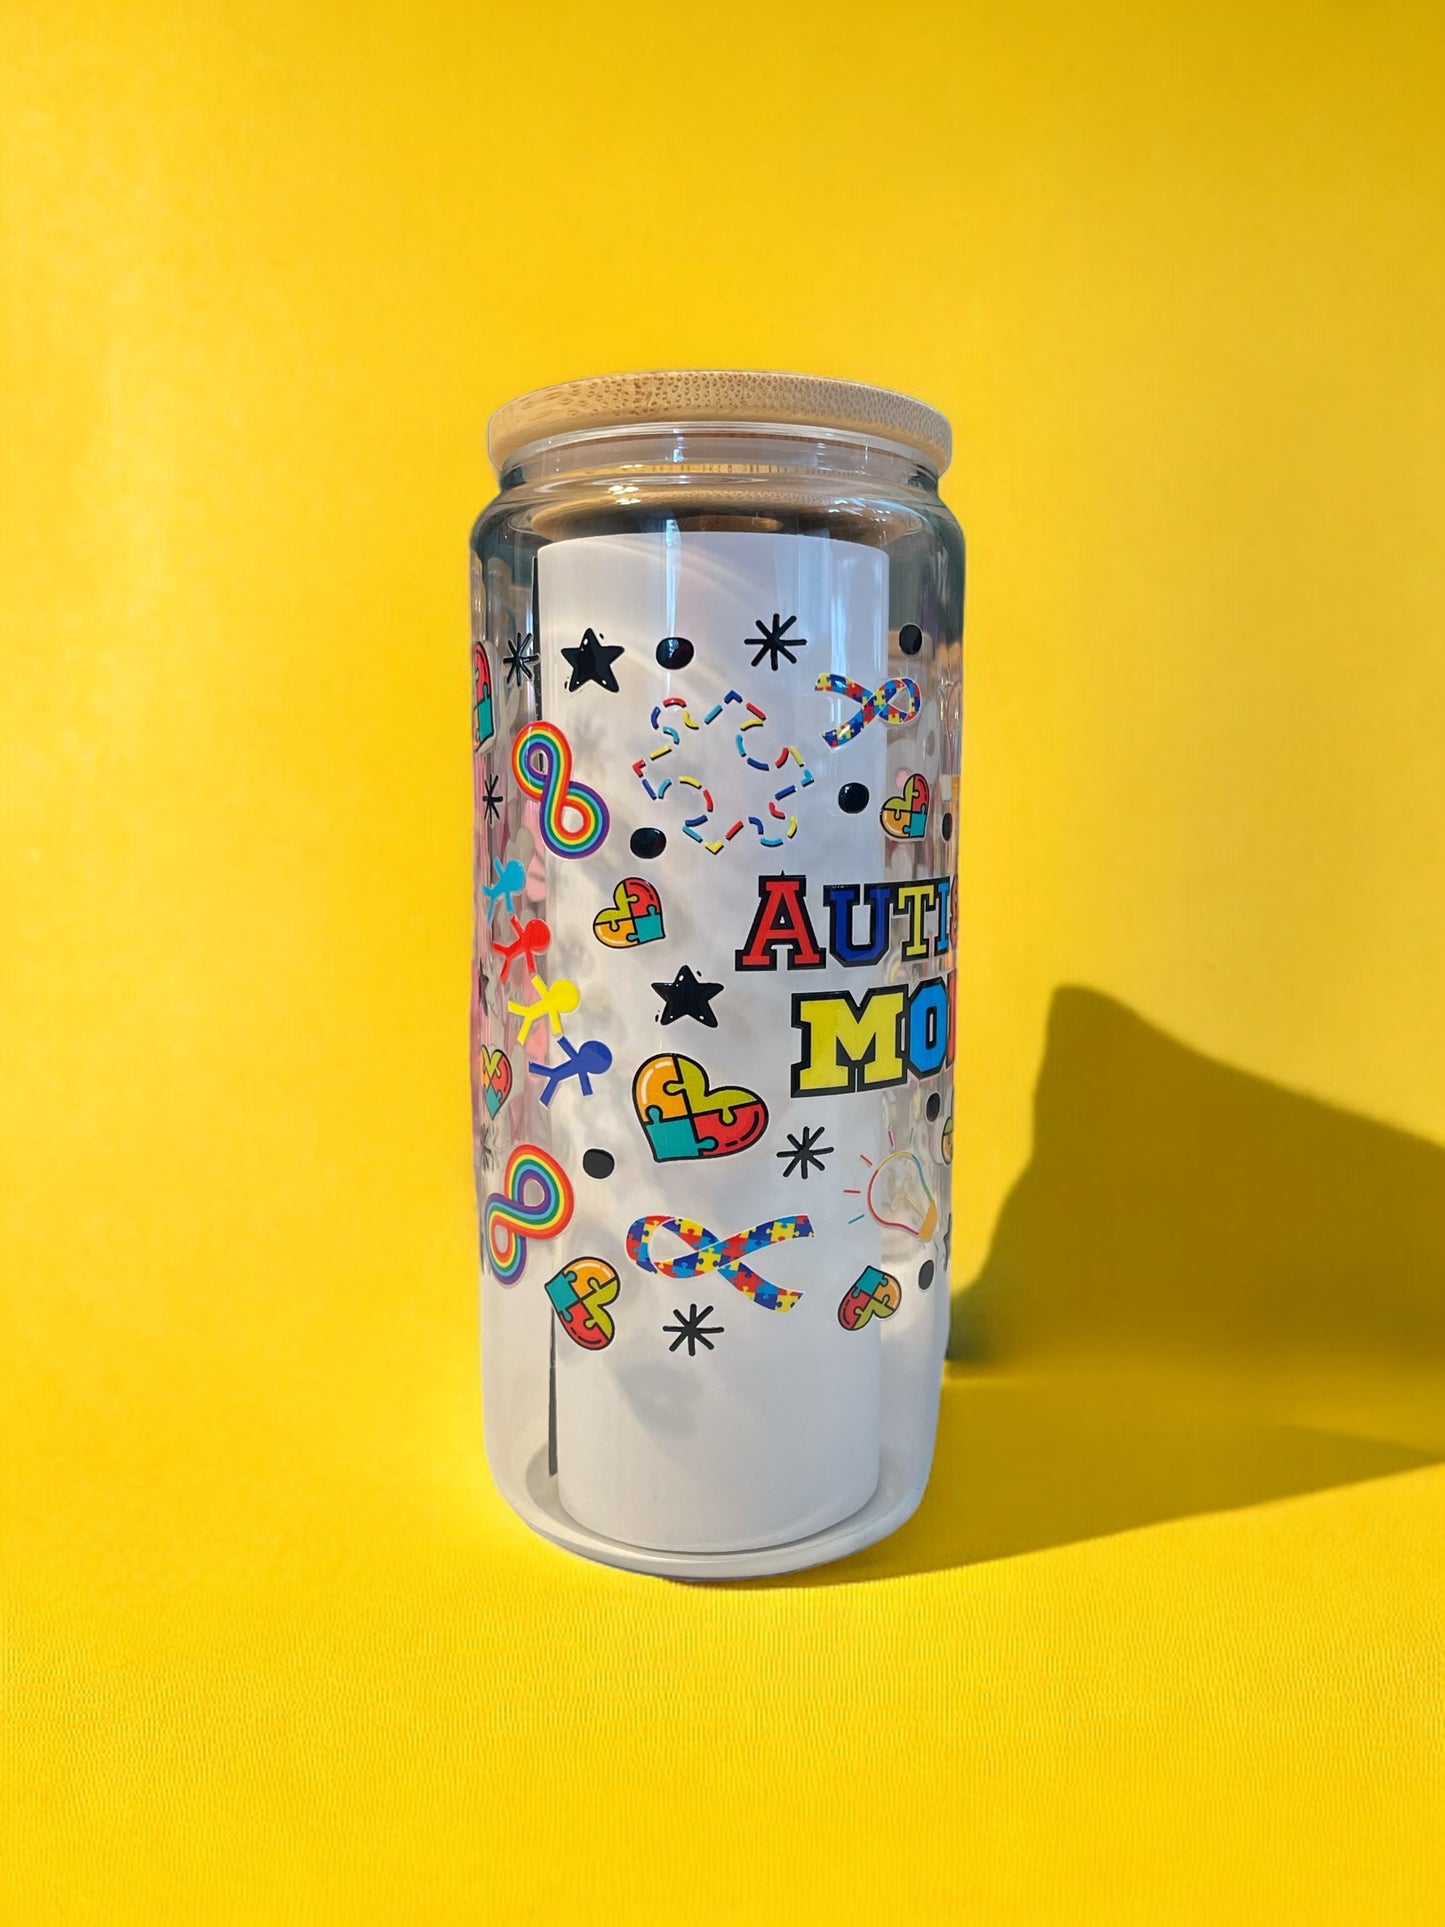 Autism Mom 20oz. Clear Glass Can with Straw, Glass Can, Beer Can, Autism Cup, Cups with Straws, Glass Cup with Straw and Bamboo Lid